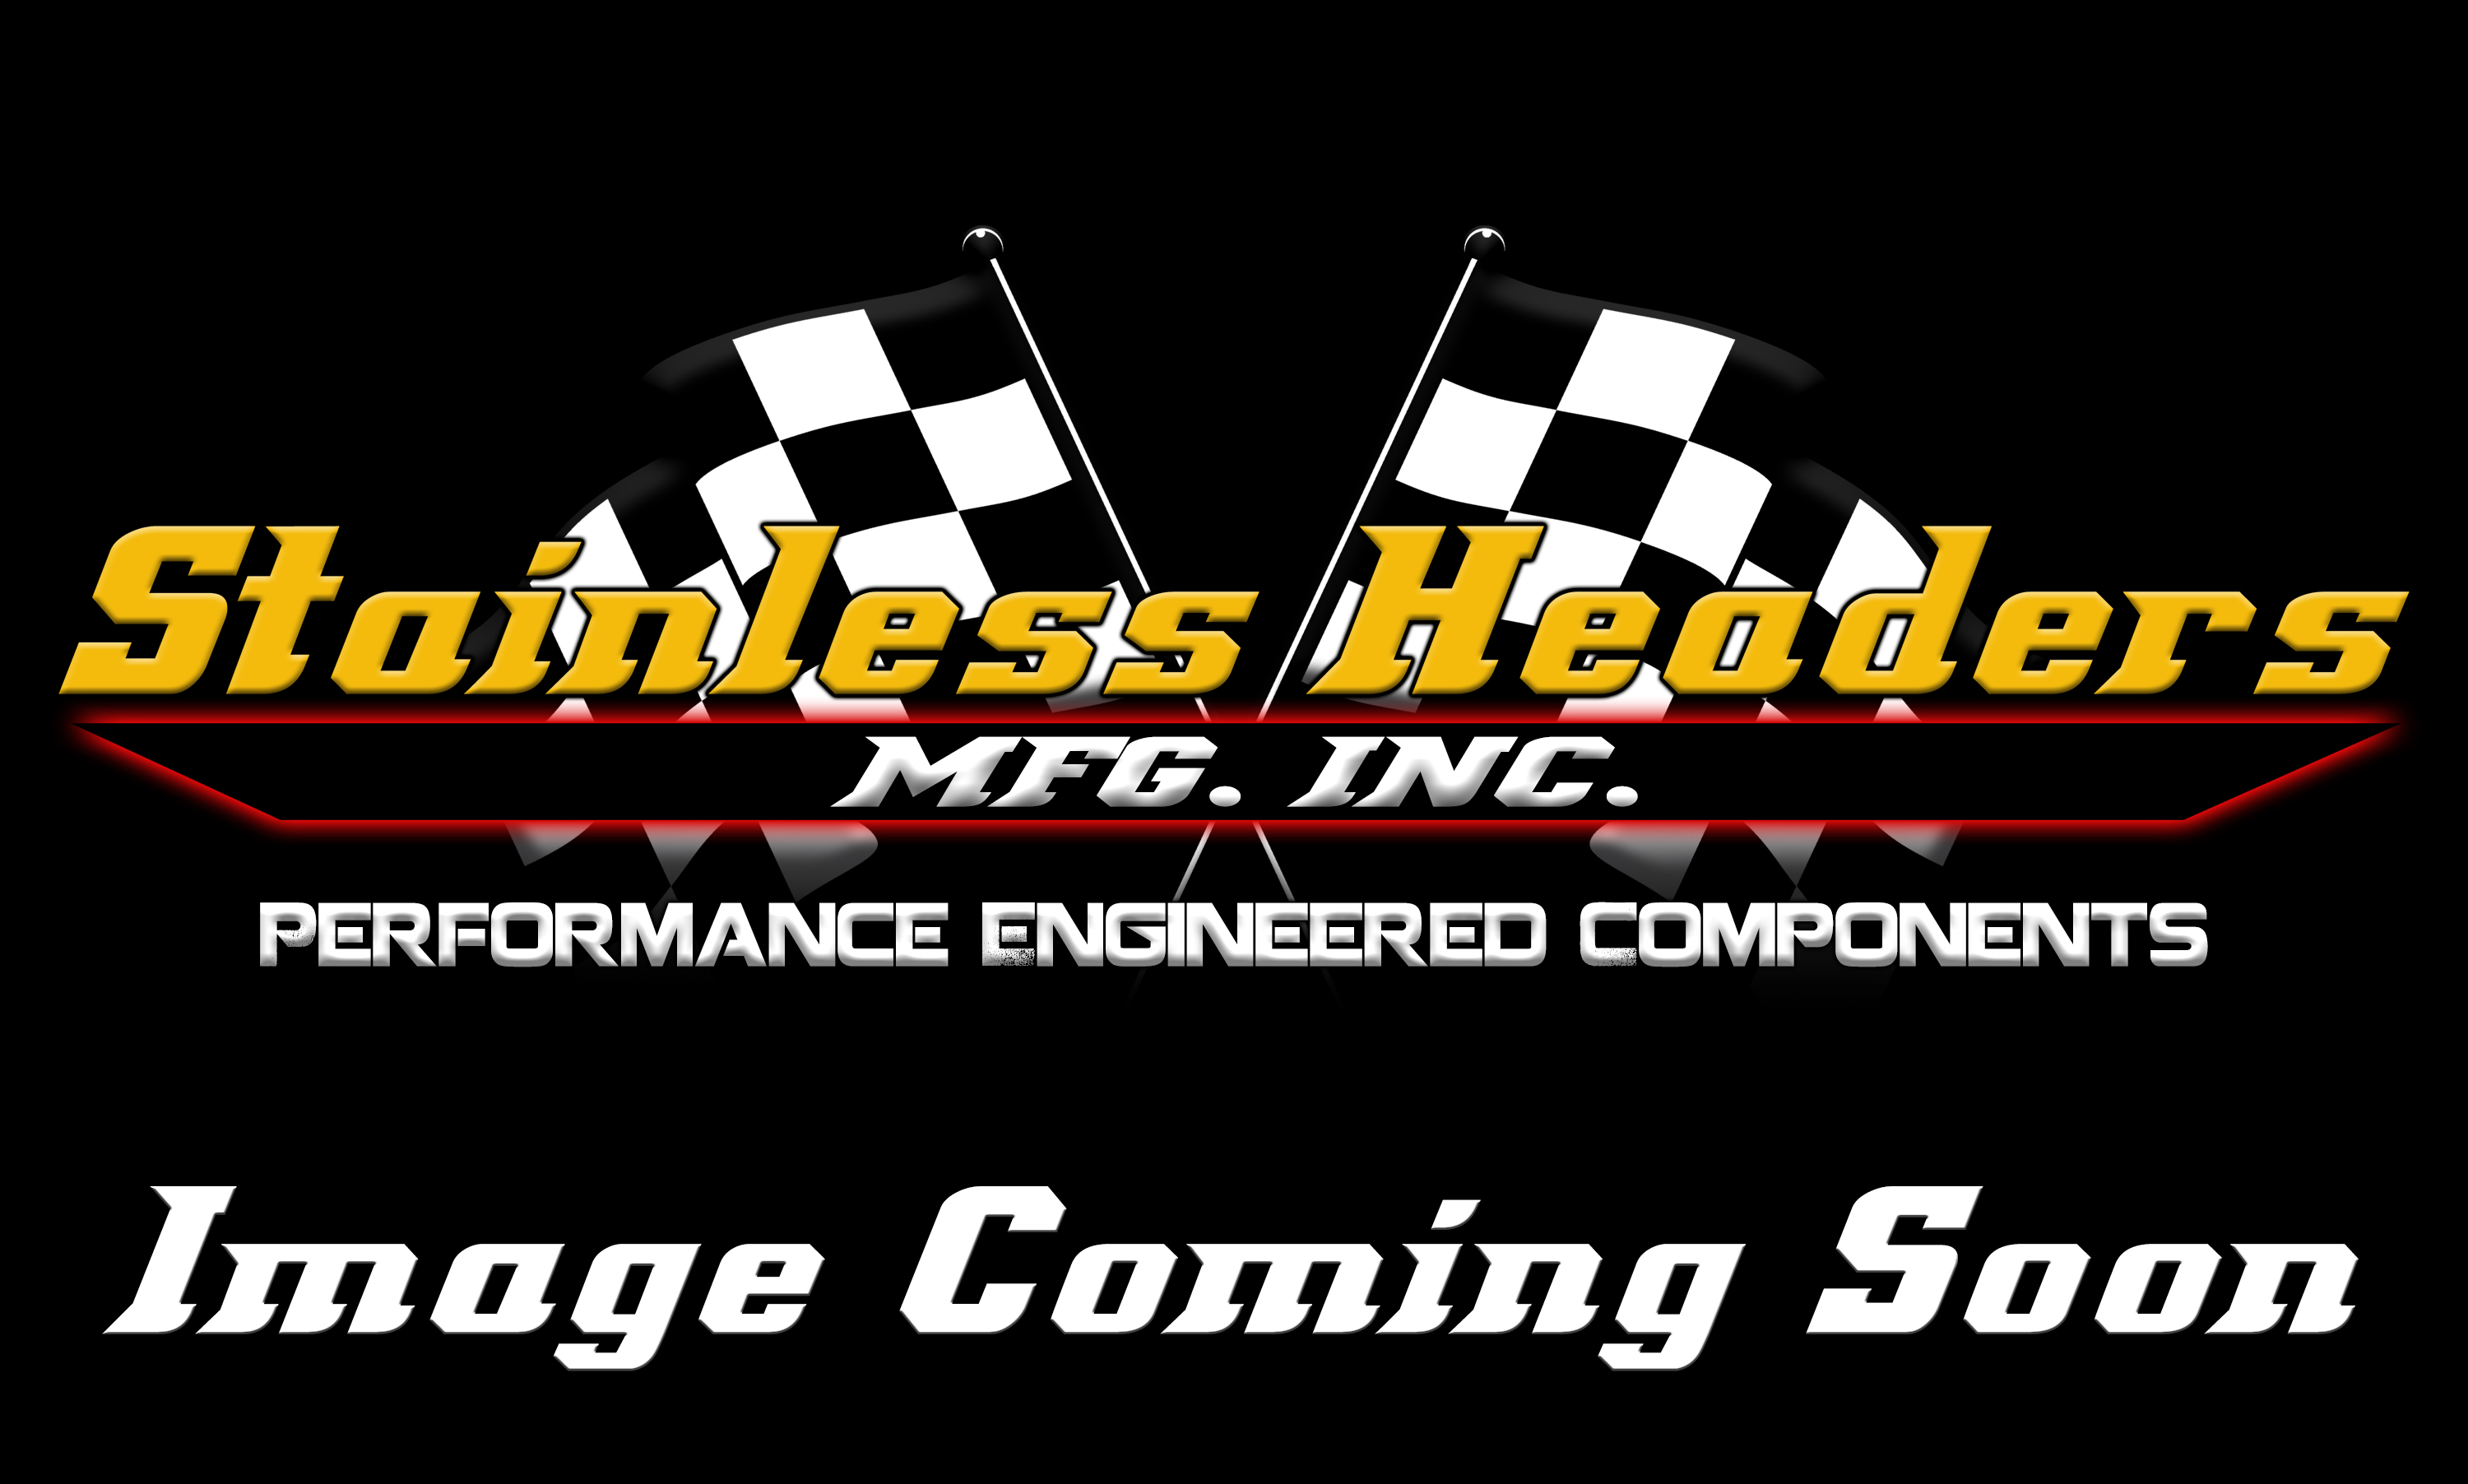 CompTurbo Technologies - CTR4202R-7285 Mid Frame Air-Cooled 1.0  Turbocharger (1250 HP)